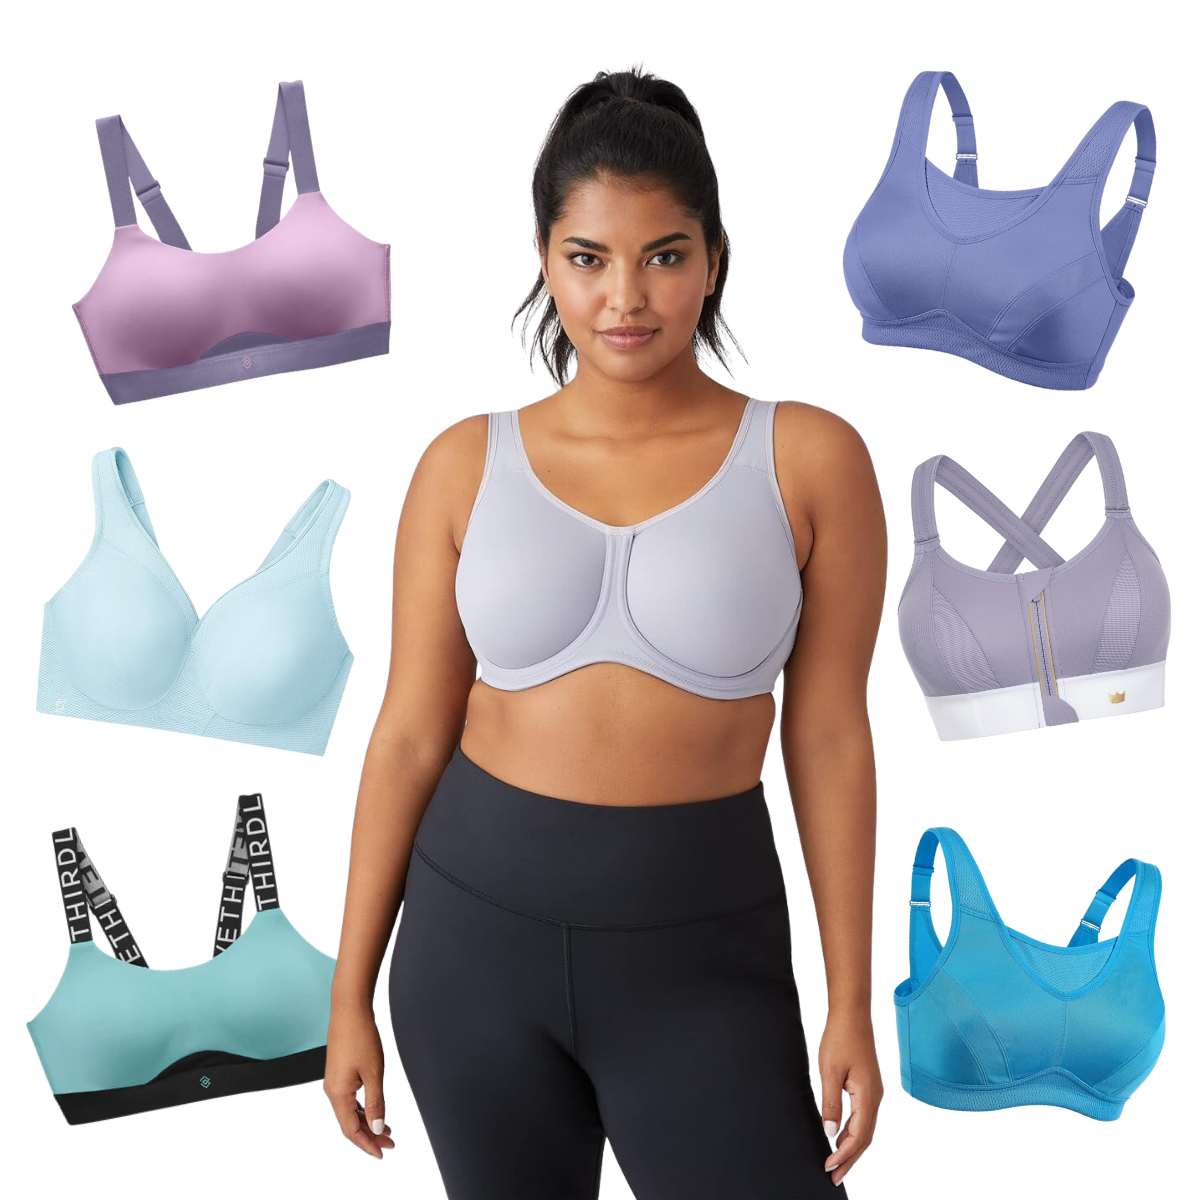 Bloom Bra, the Sports Bra for Big Boobs, Reviewed